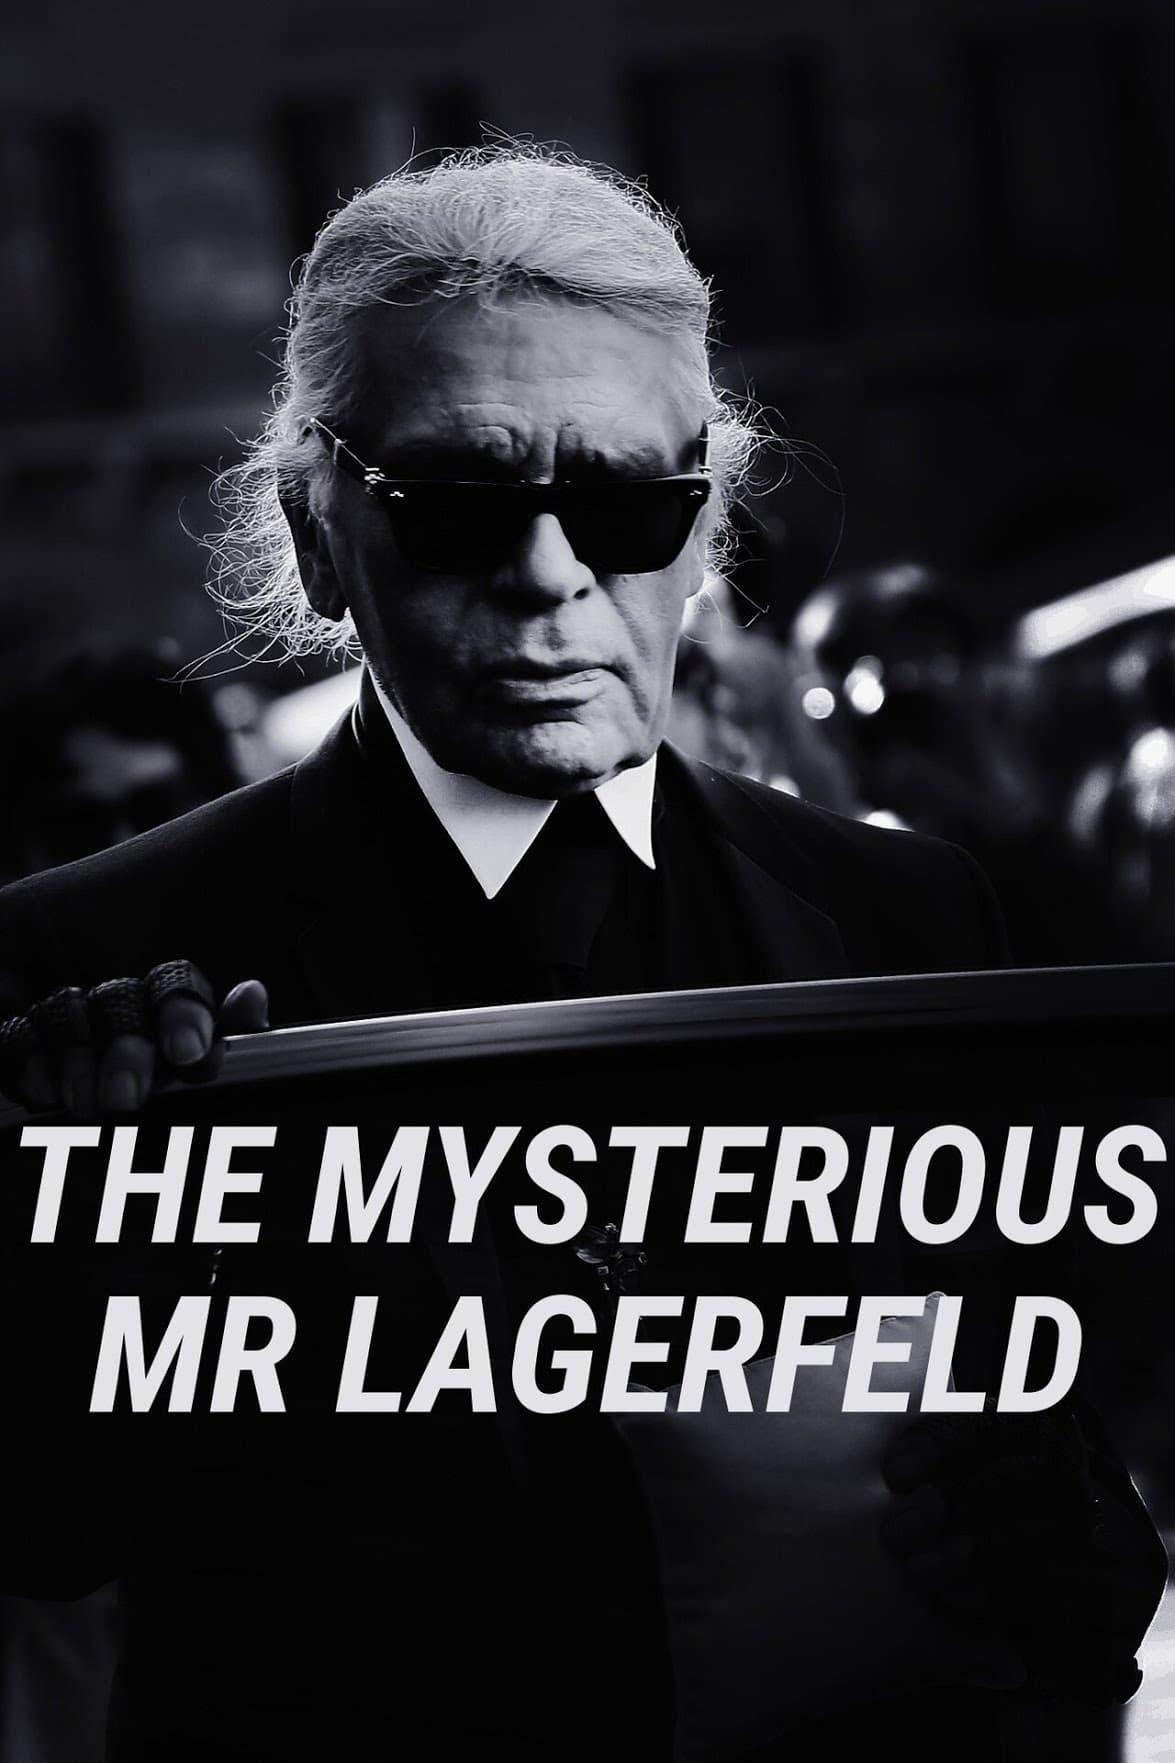 The Mysterious Mr. Lagerfeld poster